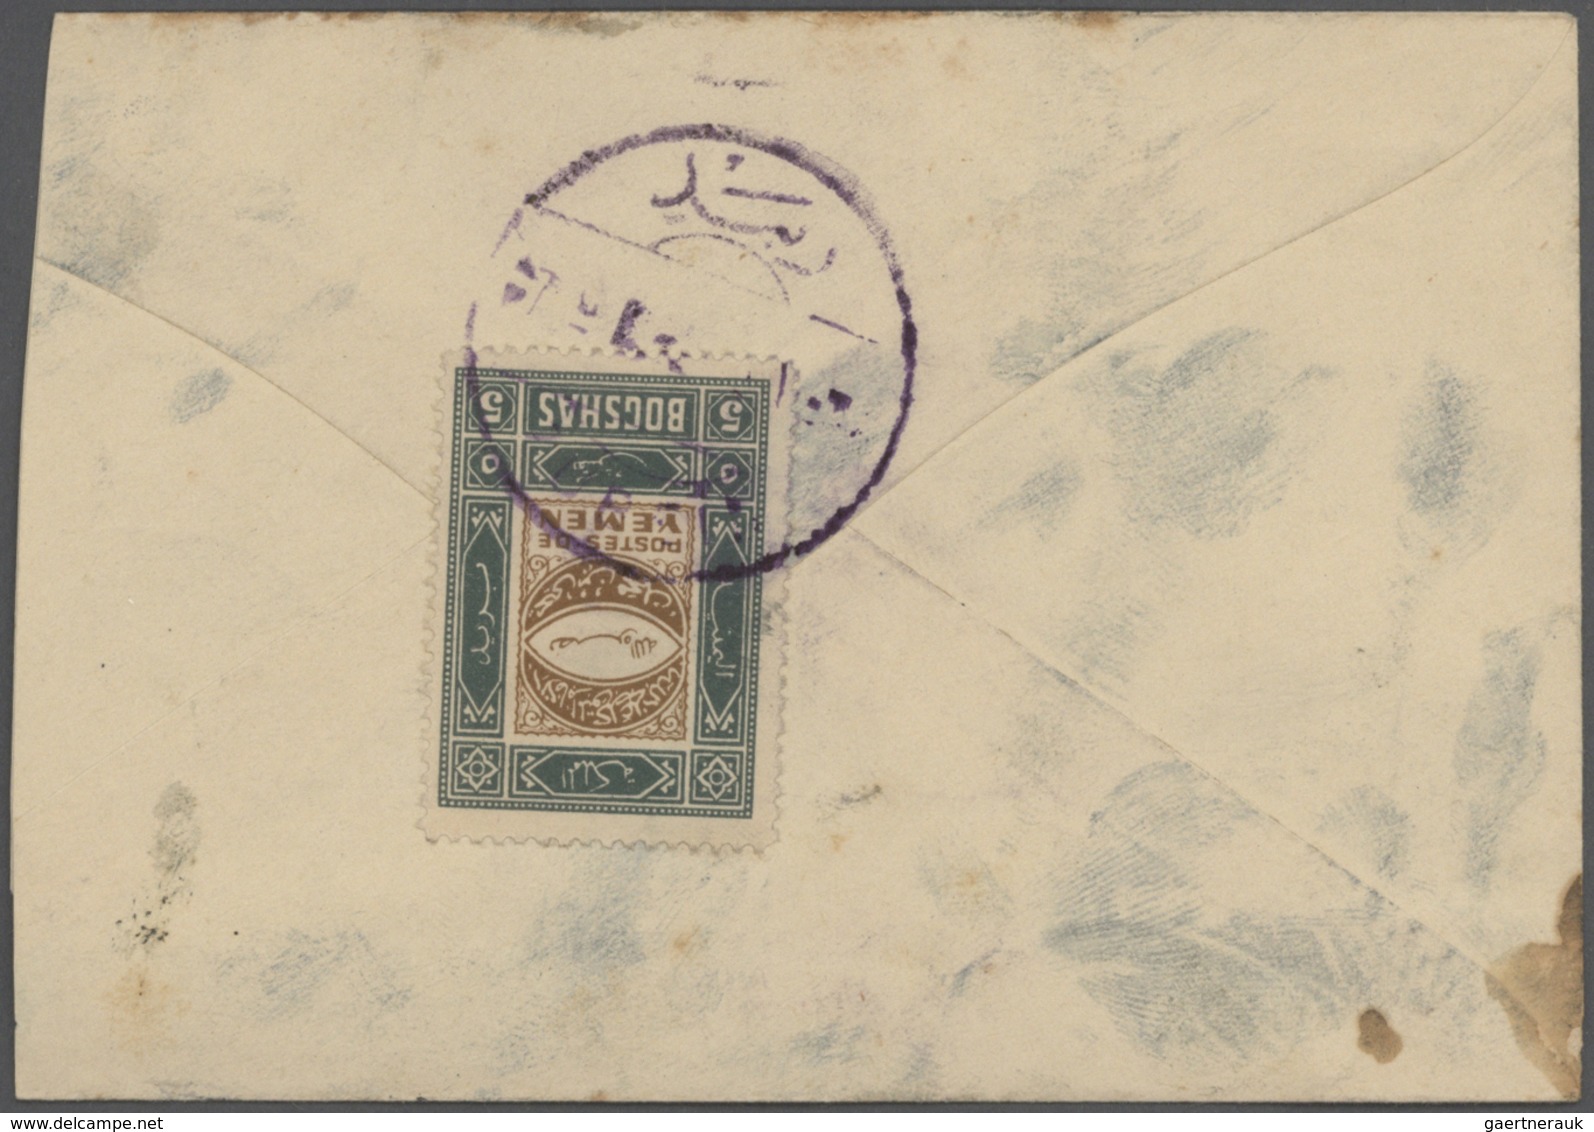 22986 Jemen: 1925-80, Box containing 1095 covers & FDC, including registered mail, air mail, overprinted i